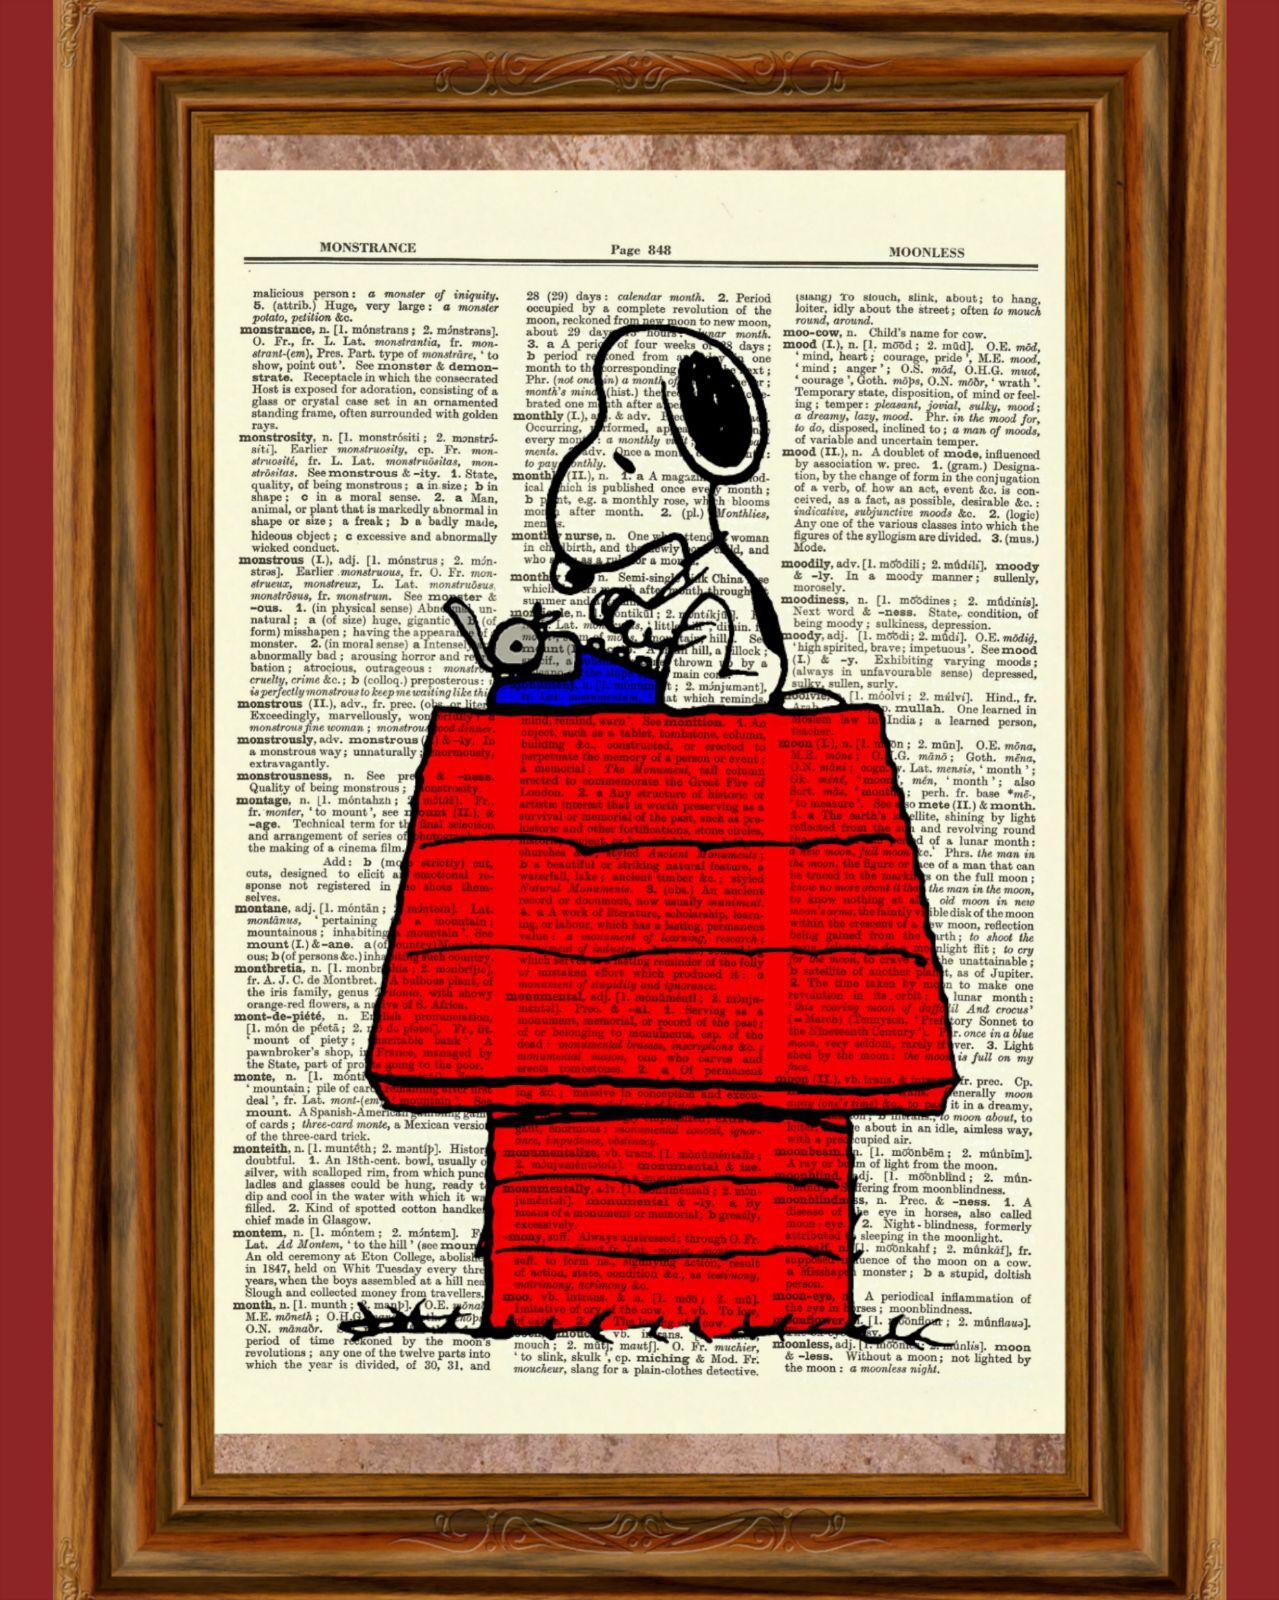 Snoopy Charlie Brown Dictionary Art Print Picture Poster Peanuts At Typewriter